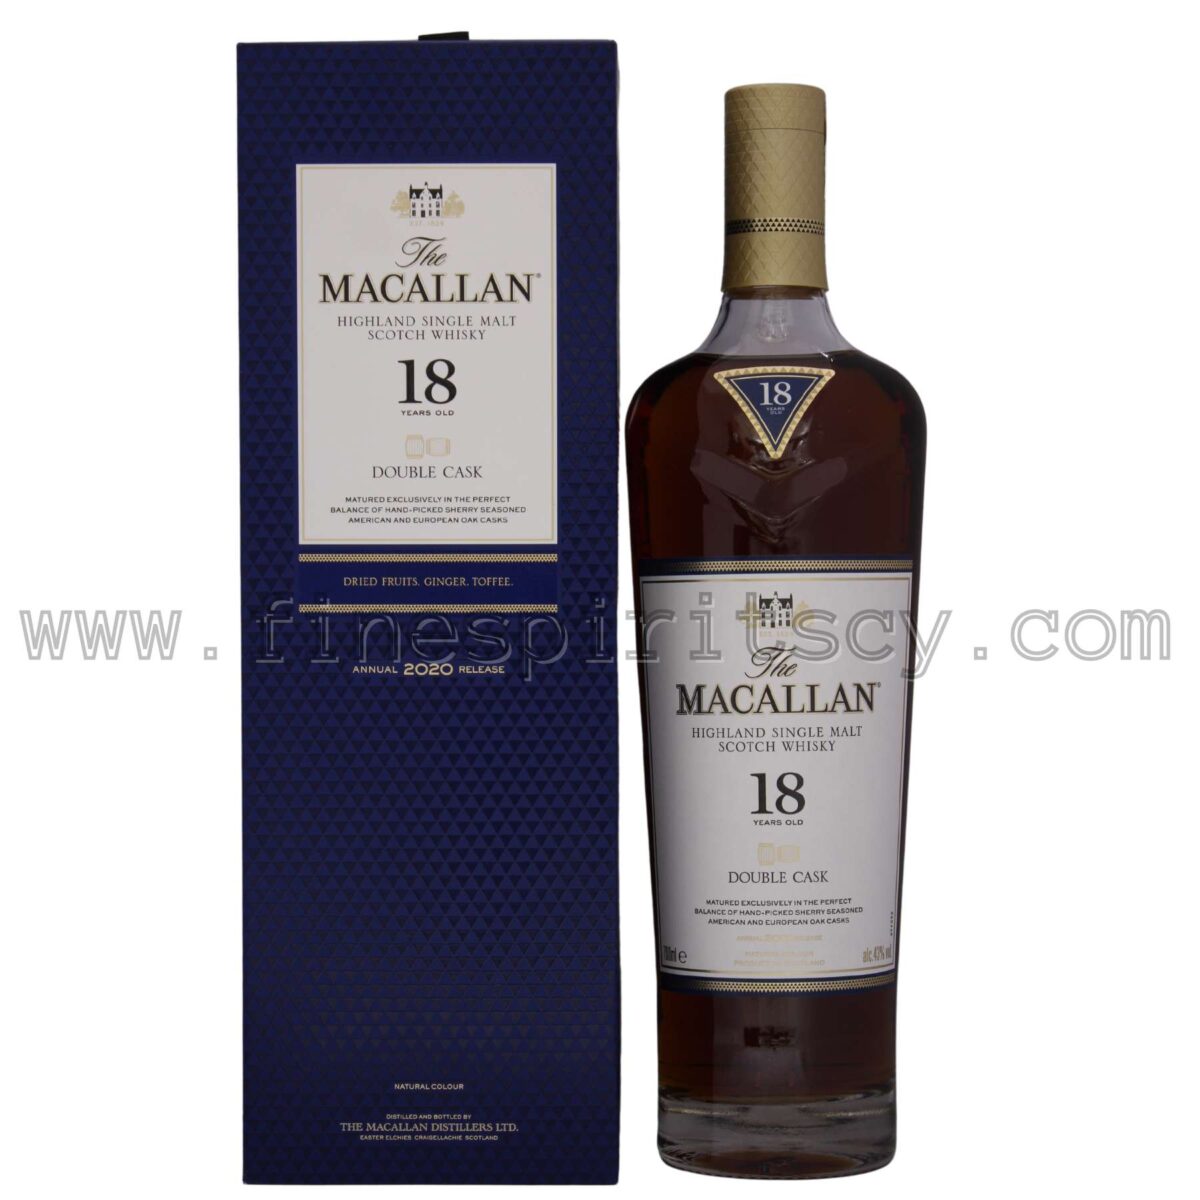 Macallan 18 Year Old Premium Scotch Double Cask Cyprus Price 2020